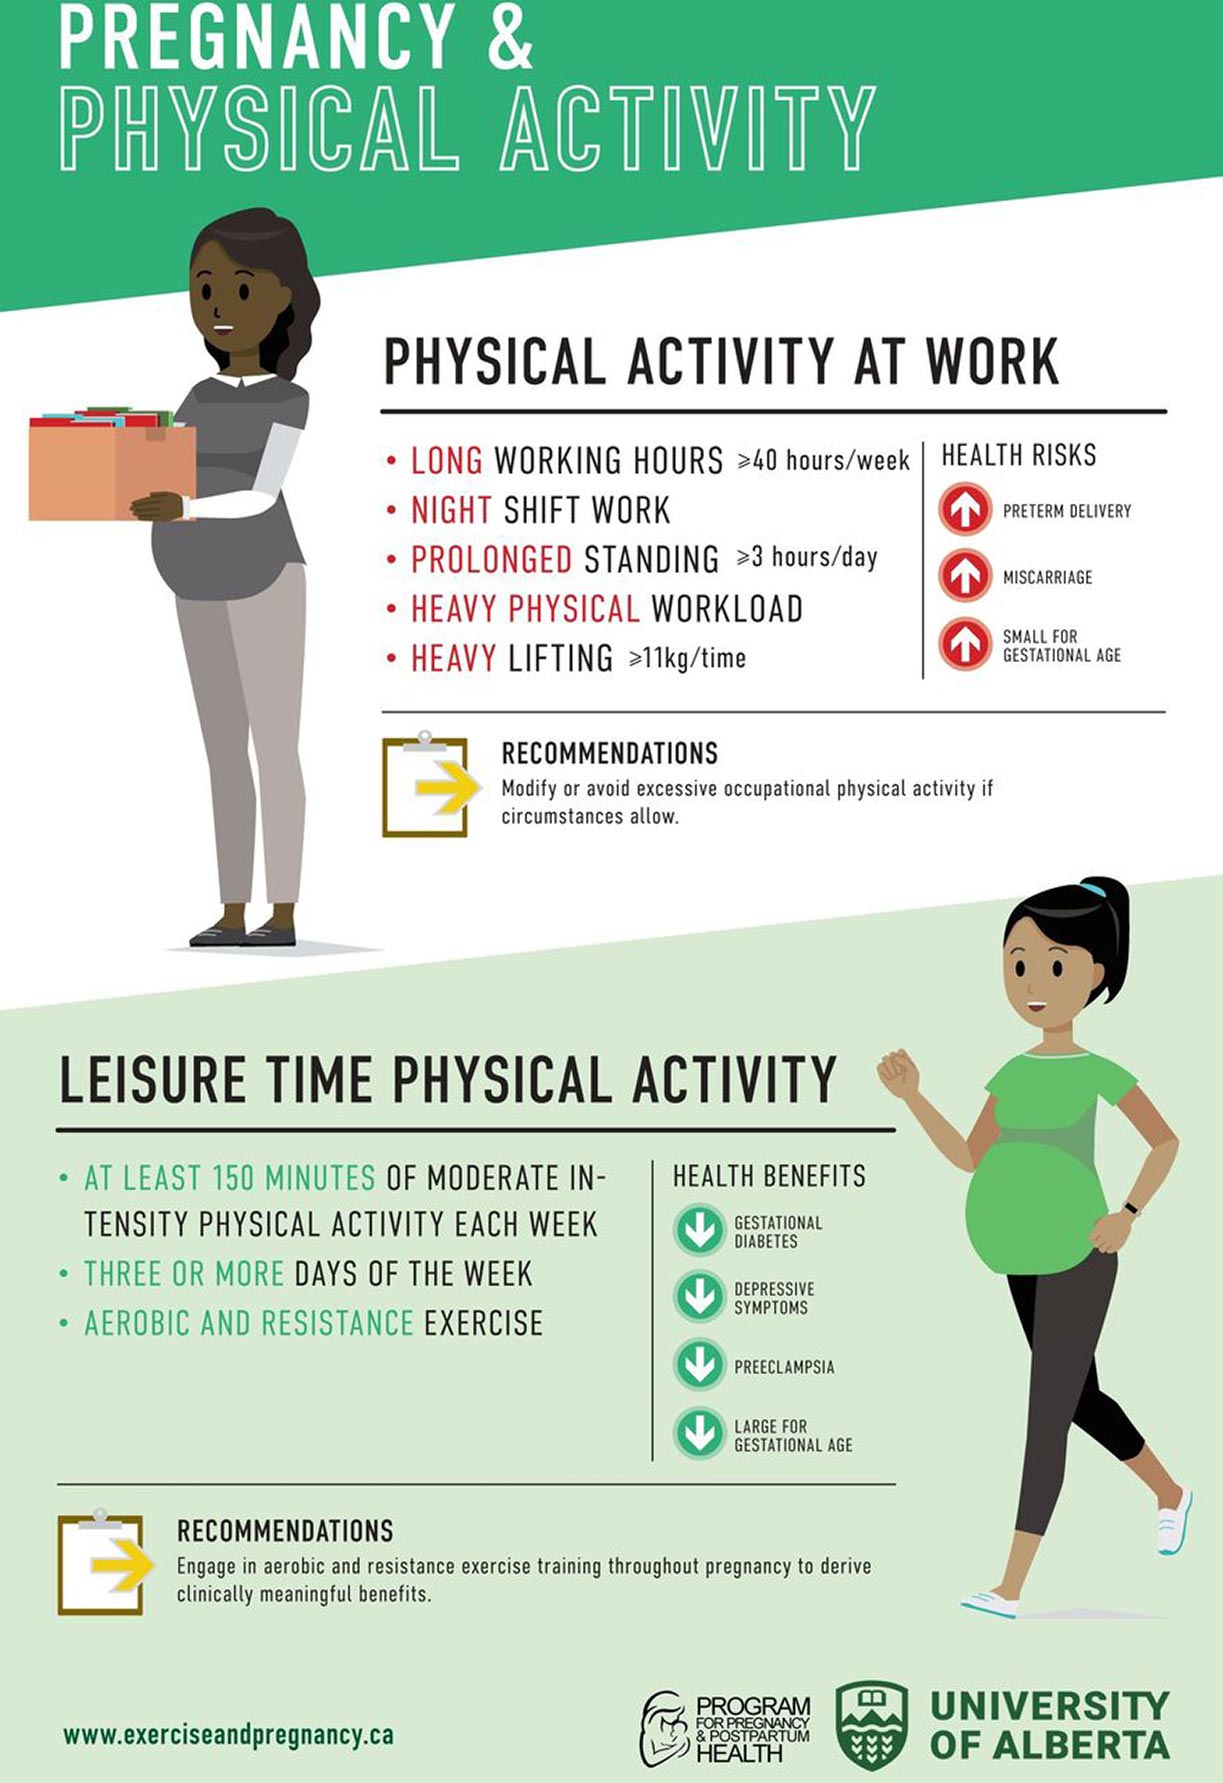 Benefits of being active during pregnancy - infographic